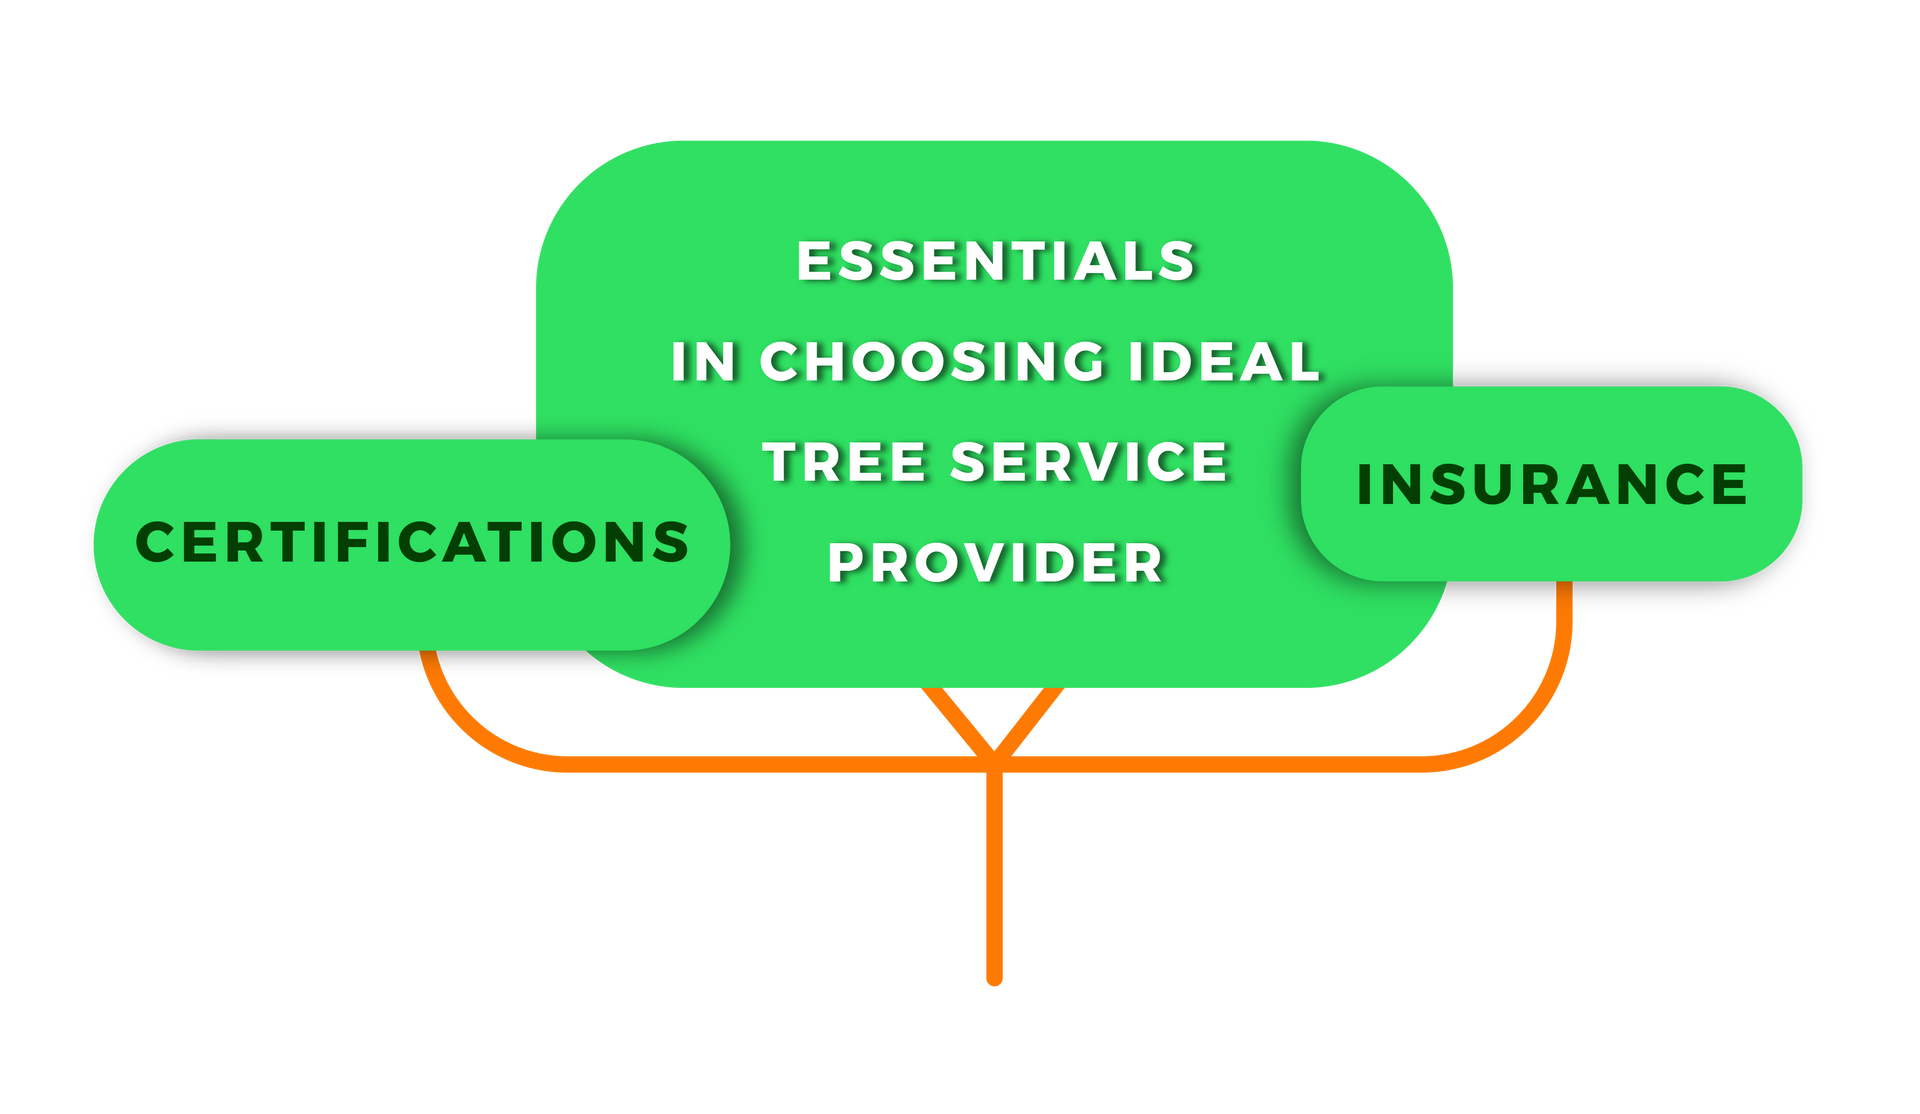 infographic tree on choosing ideal tree service provider